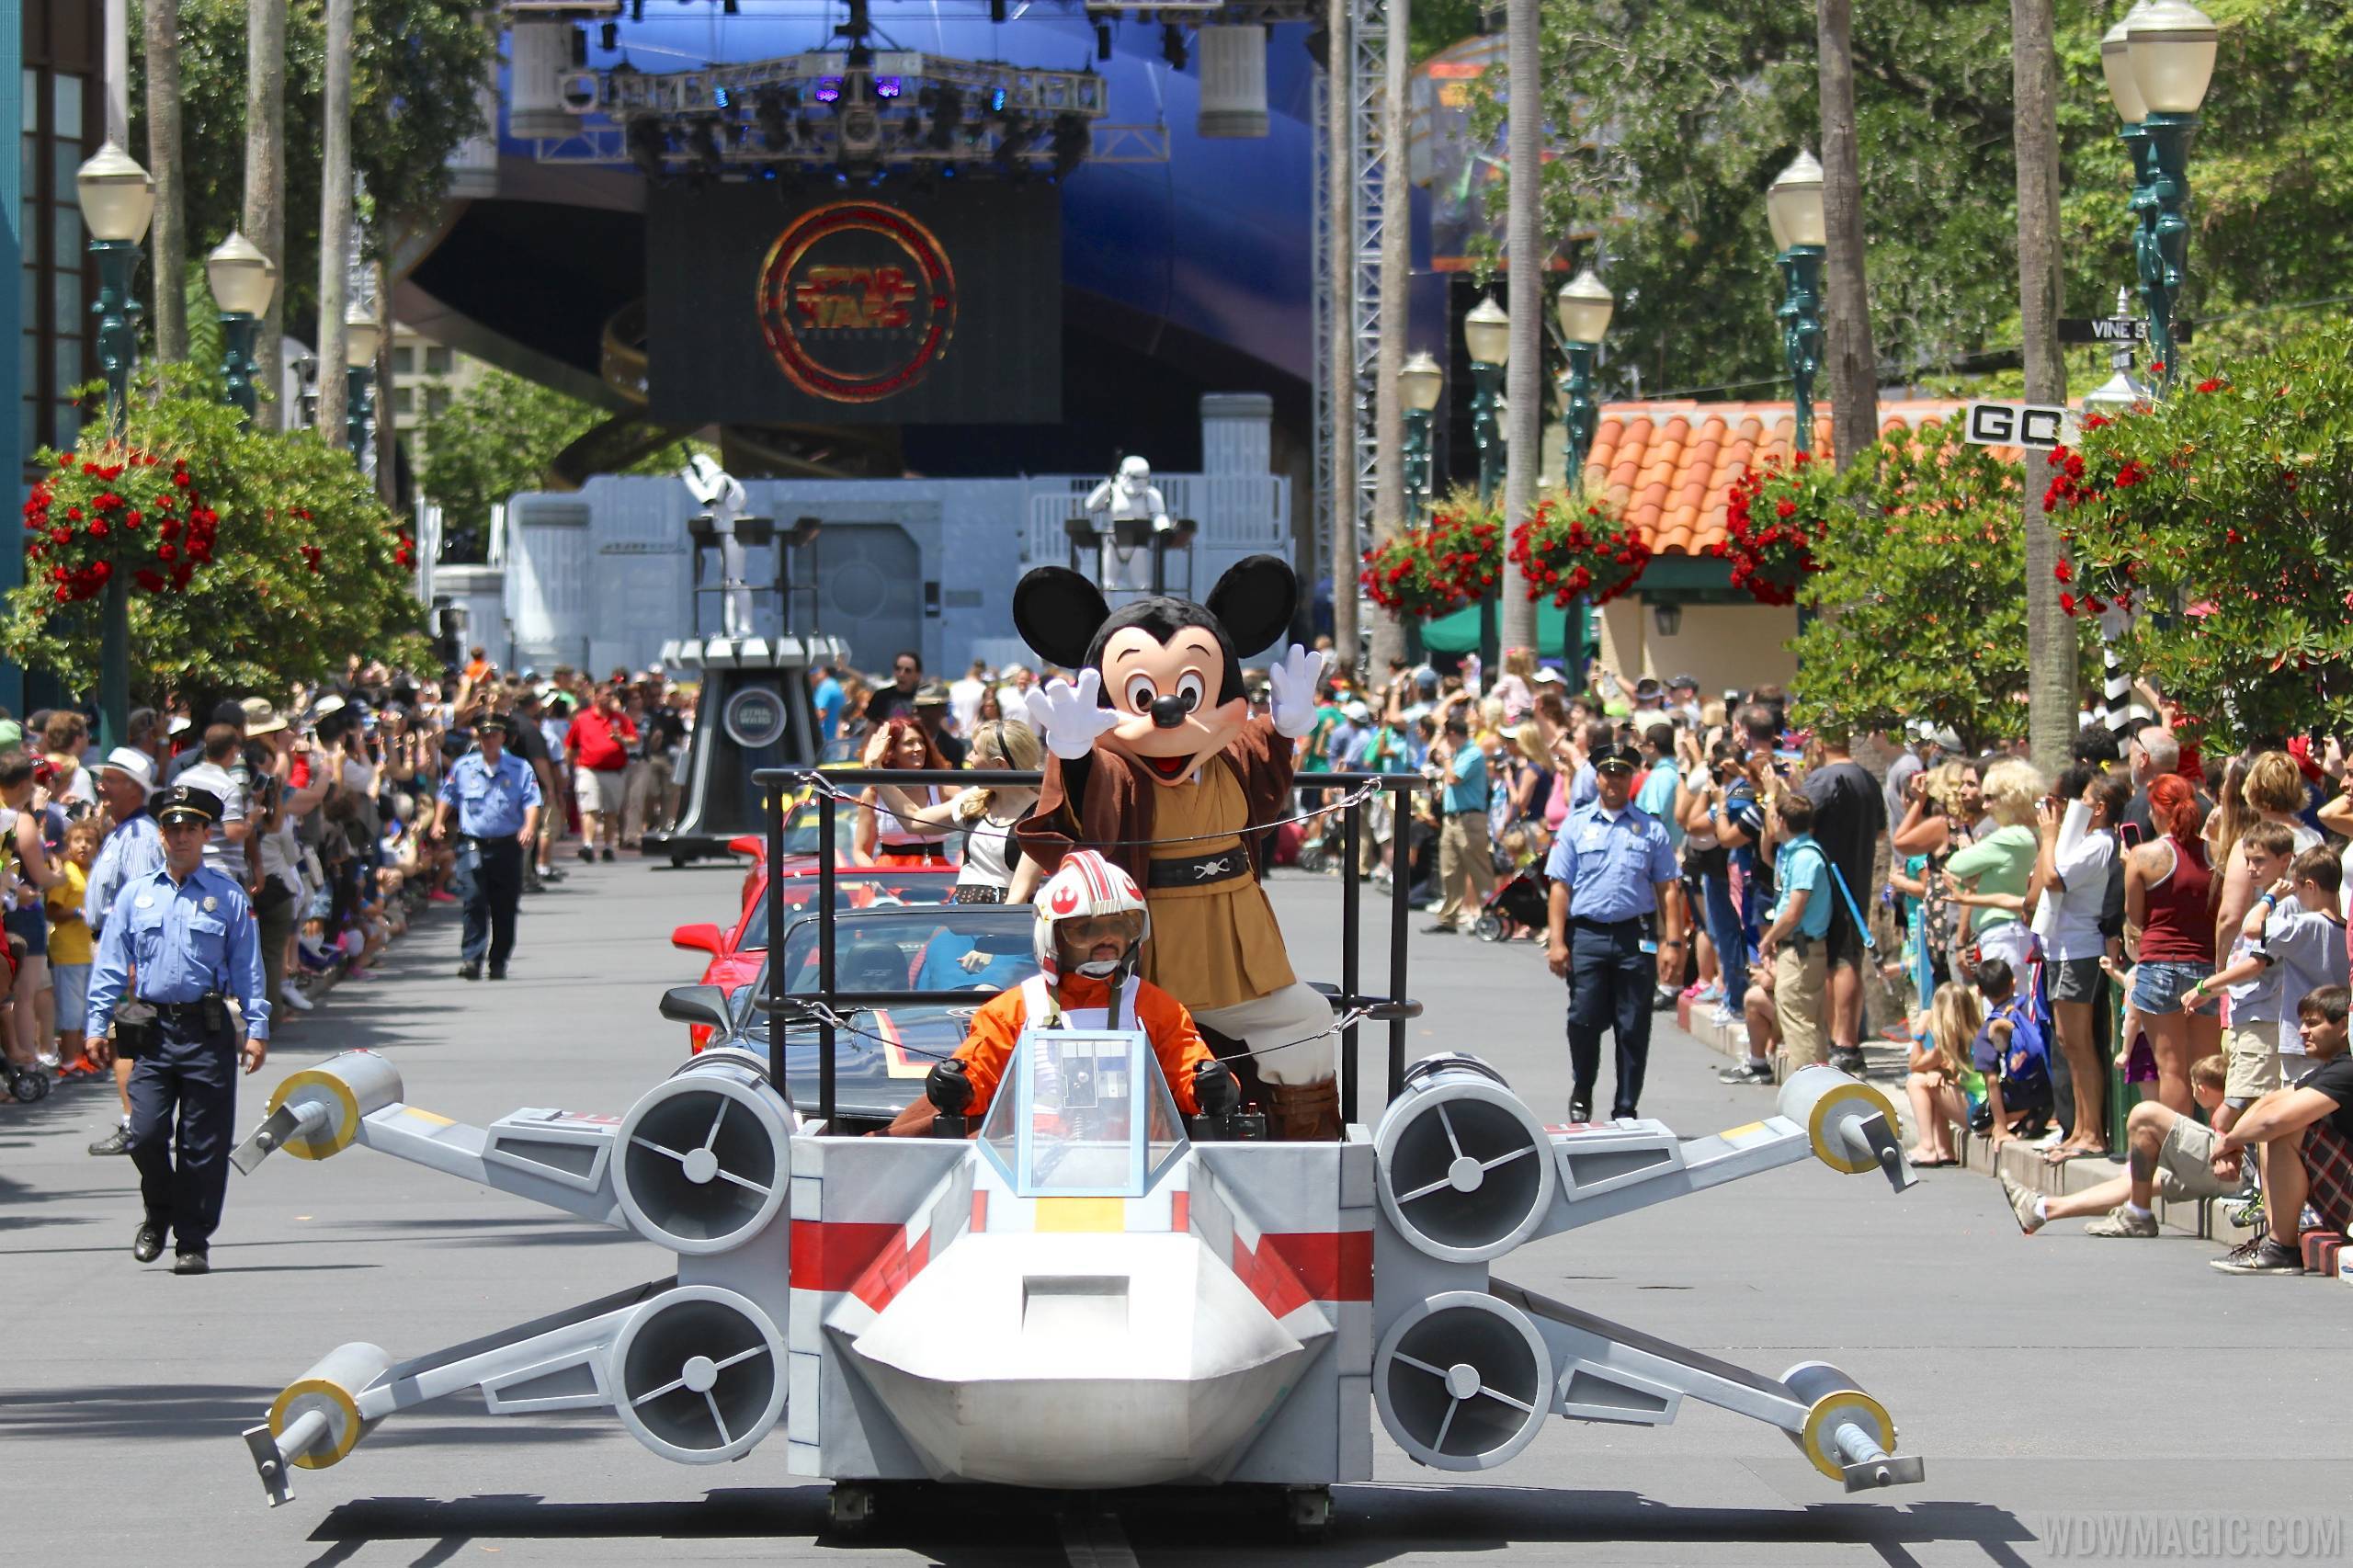 2014 Star Wars Weekends - Weekend 1 Legends of the Force motorcade - Mickey Mouse